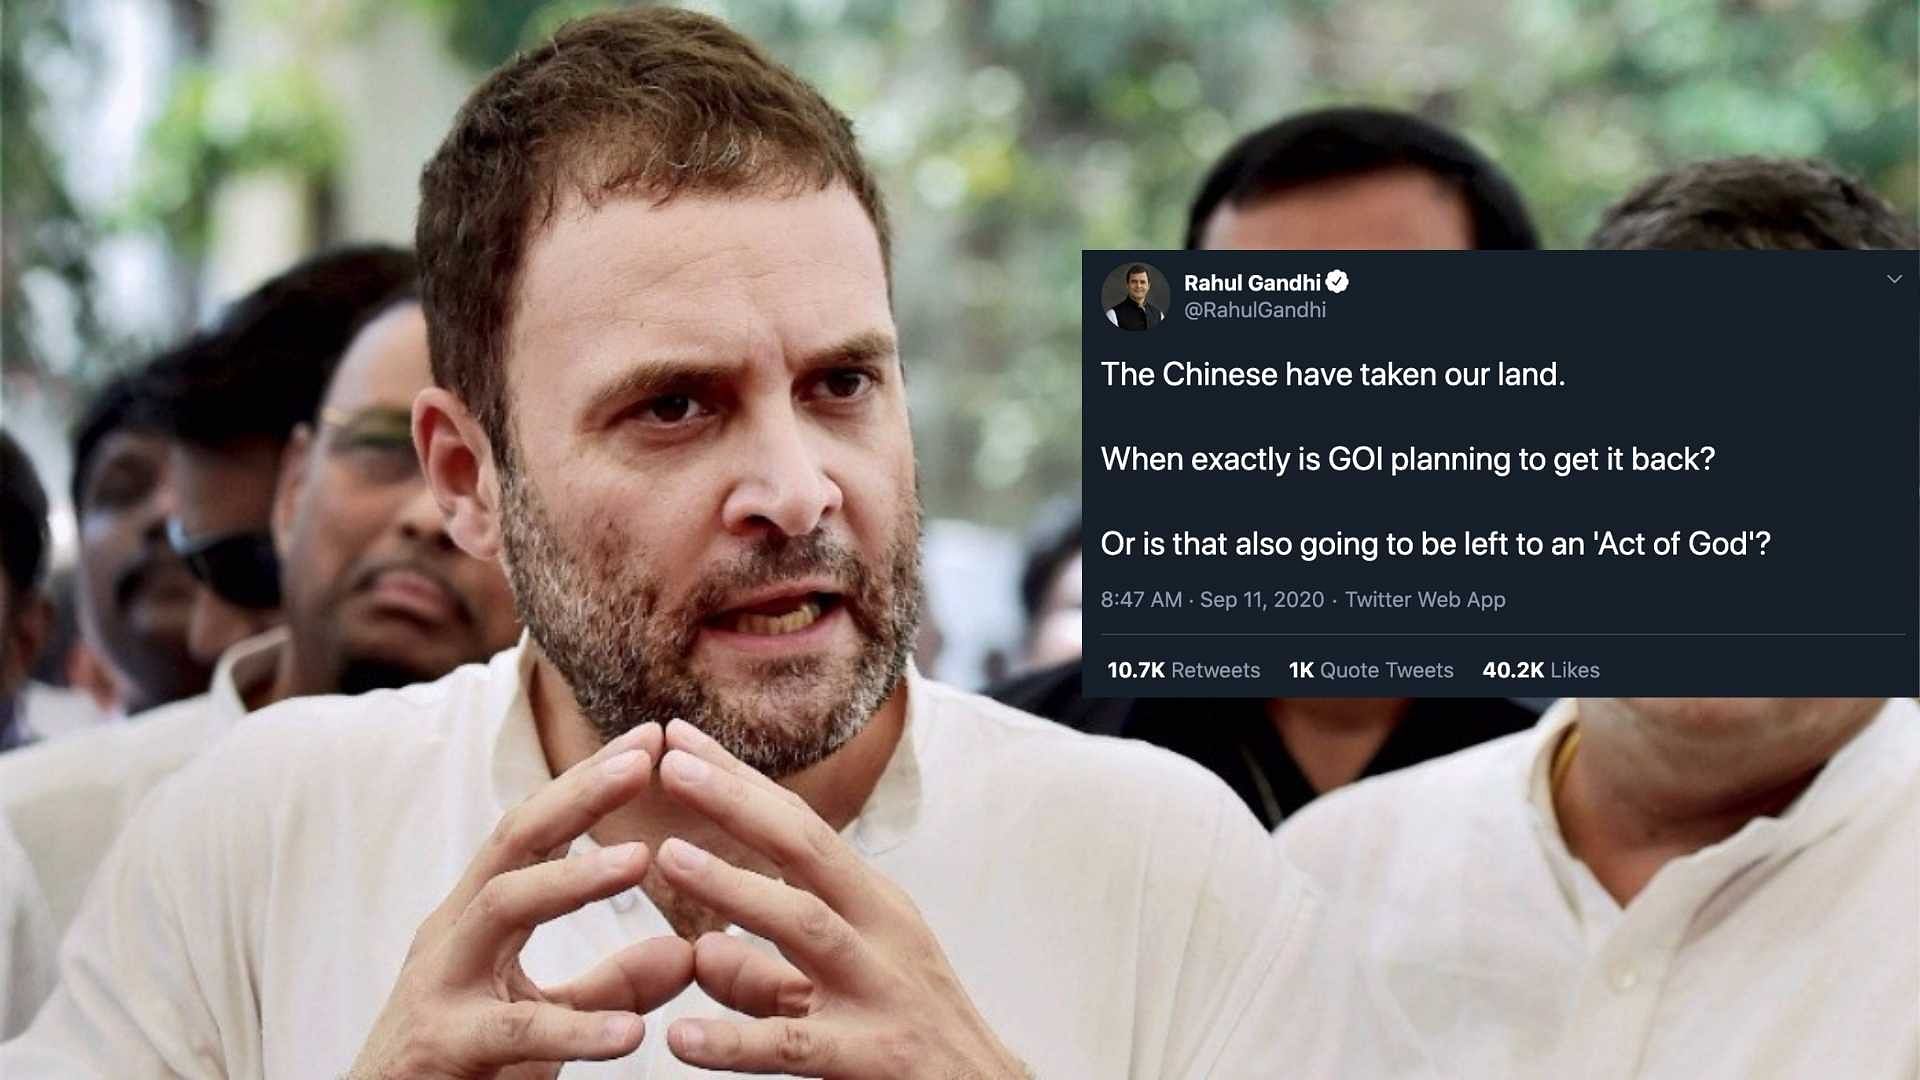 “Or is that also going to be left to an ‘Act of God’?” Rahul Gandhi wrote on Friday, slamming the Centre.